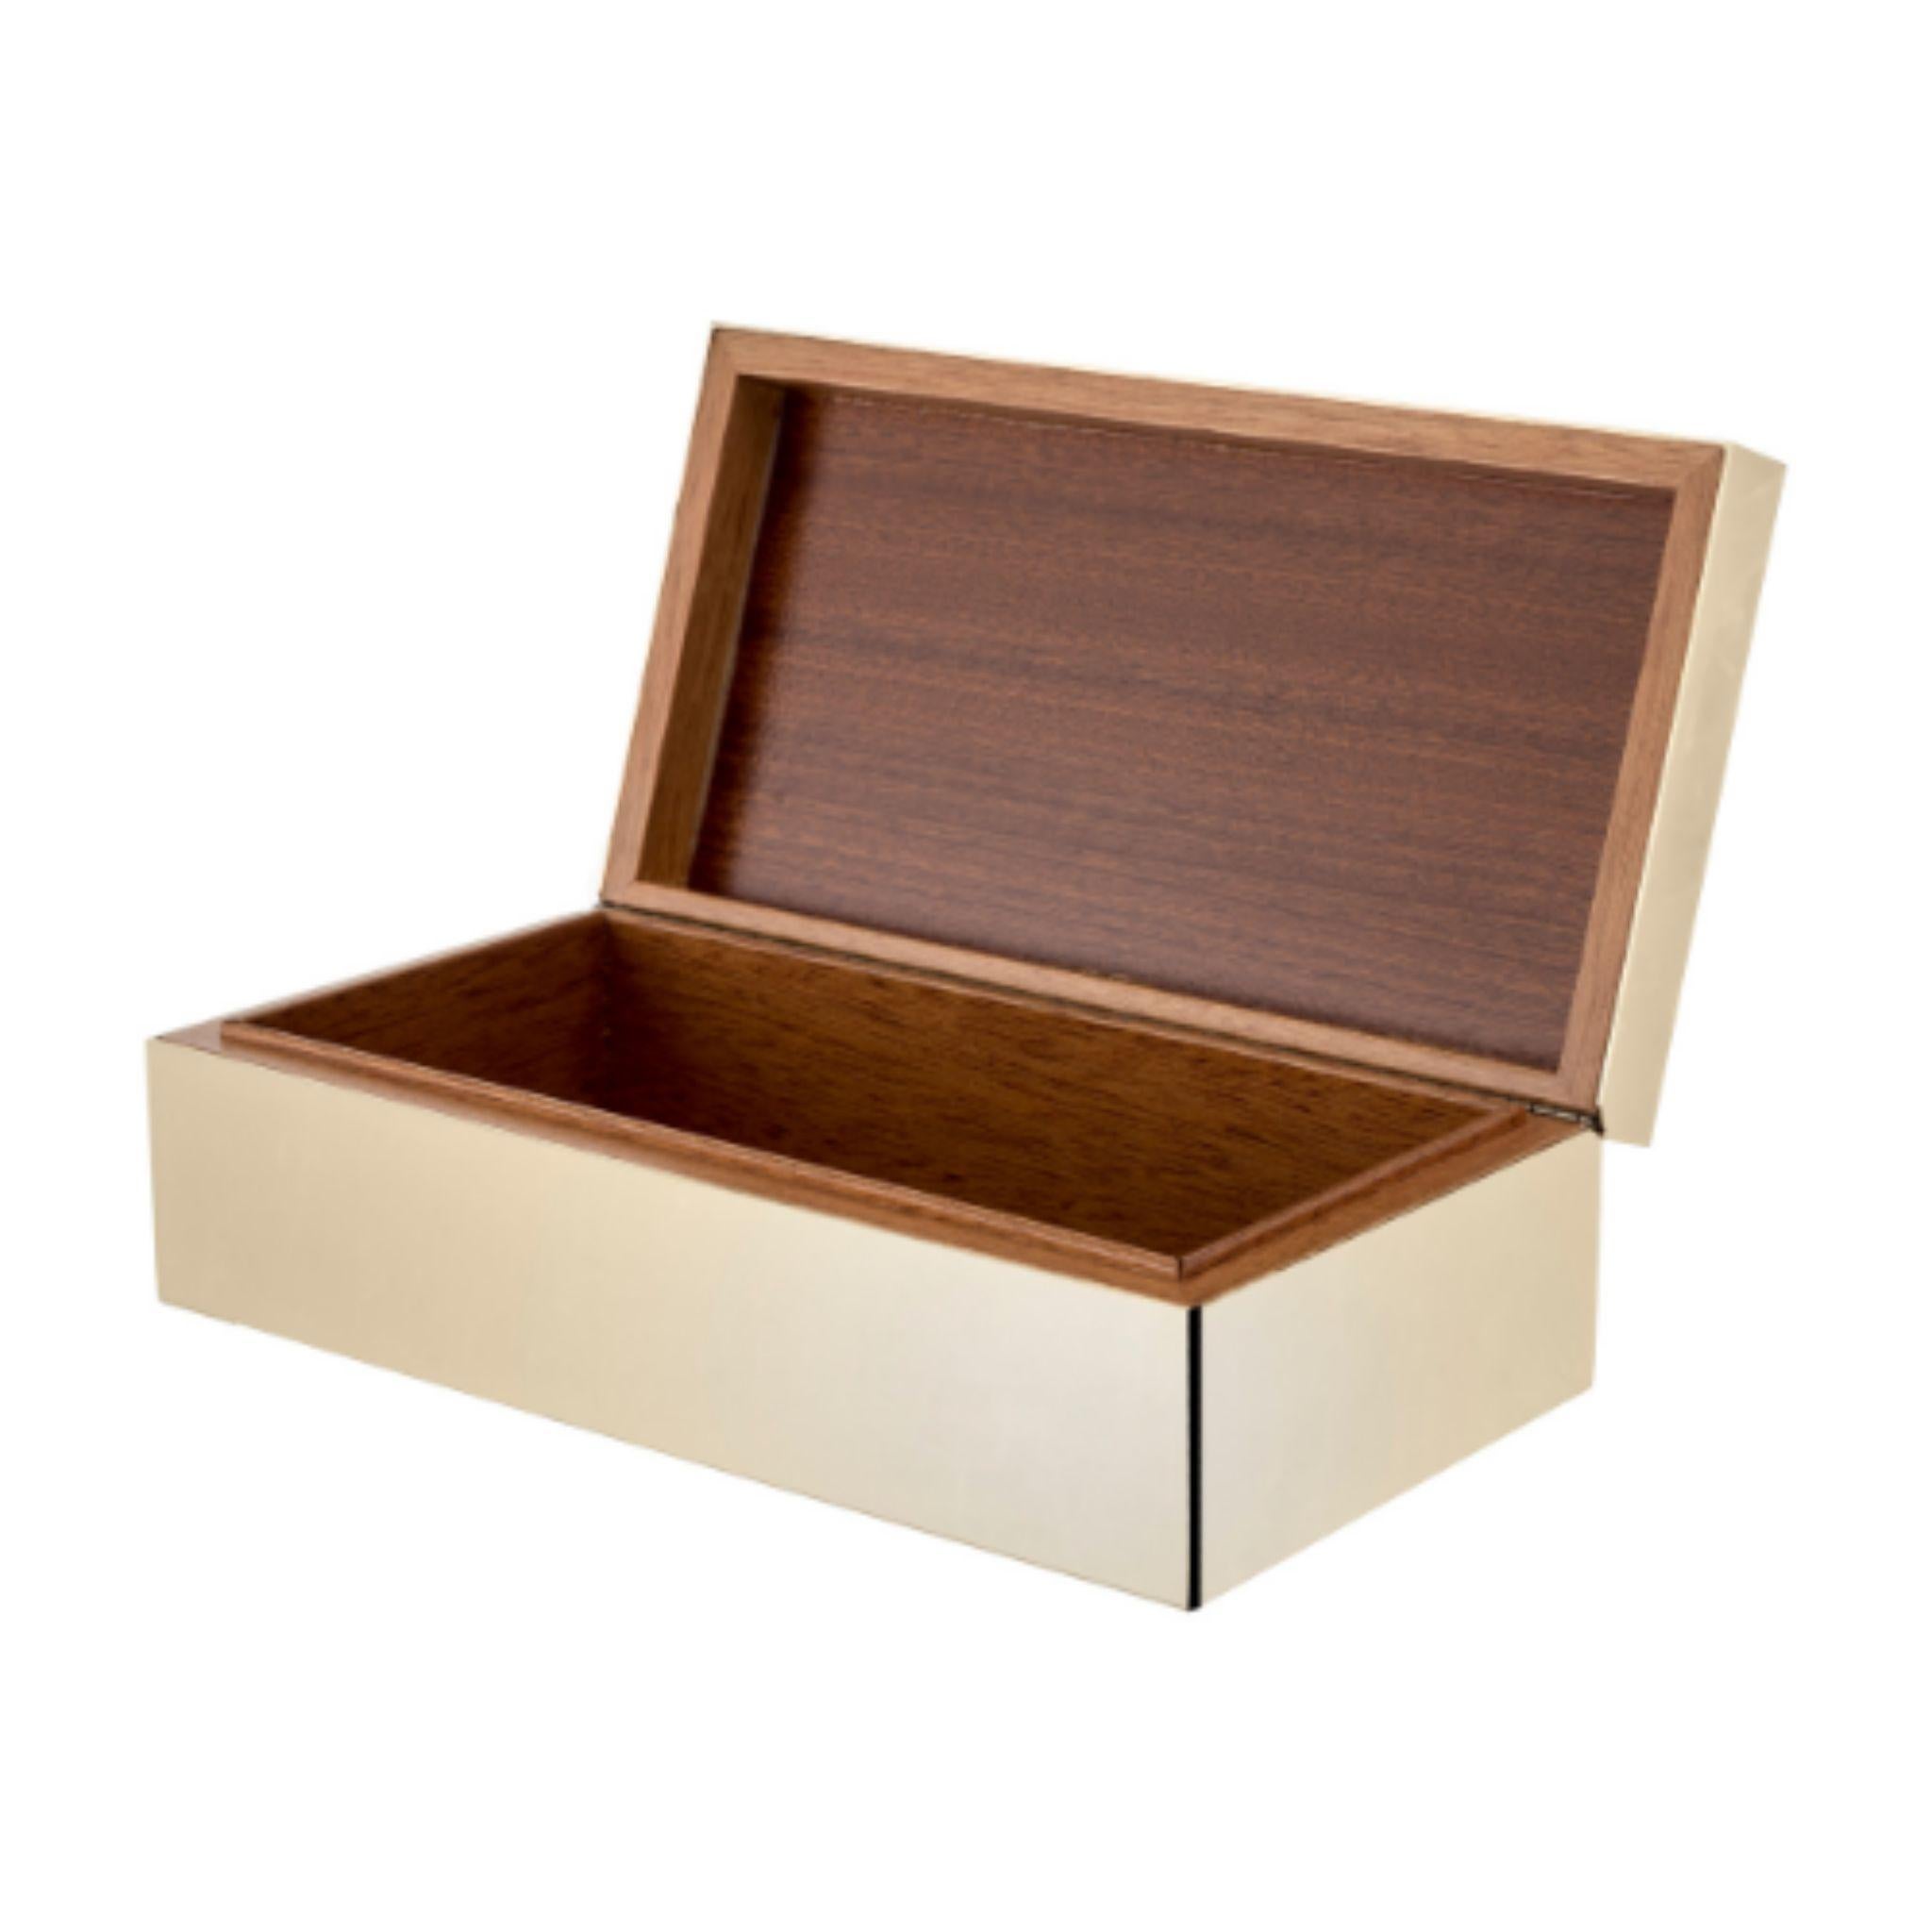 Brucaliffo Brass Cigar Box with Wooden Interior In New Condition For Sale In Firenze, FI